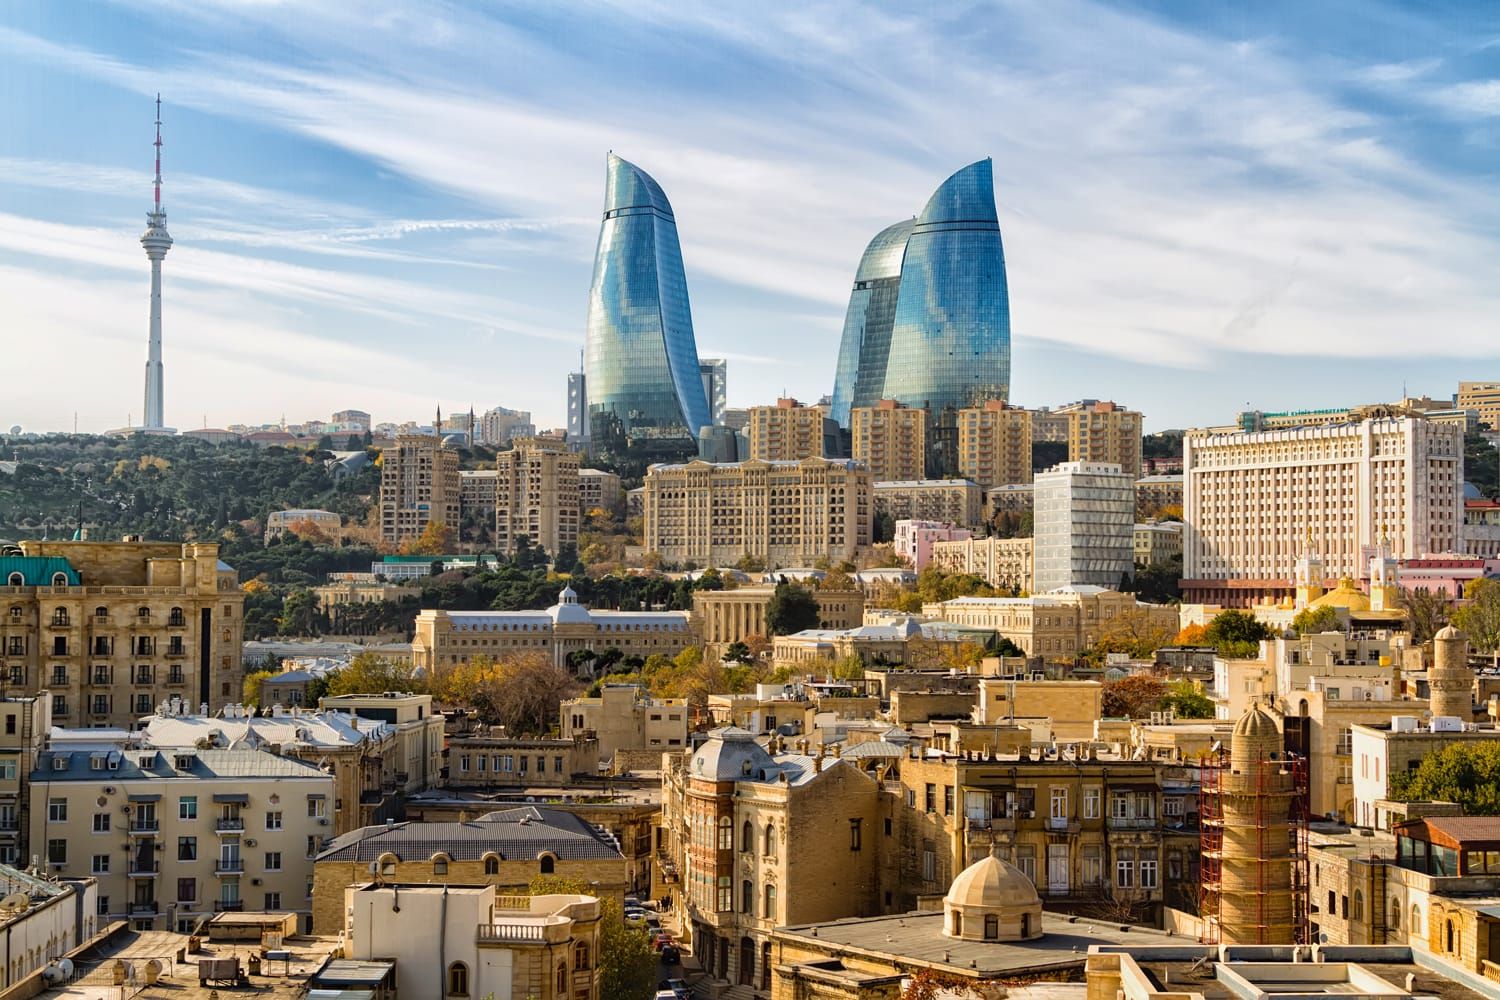 Azerbaijan's wise strategy driven by building cordial ties with major regional & global actors